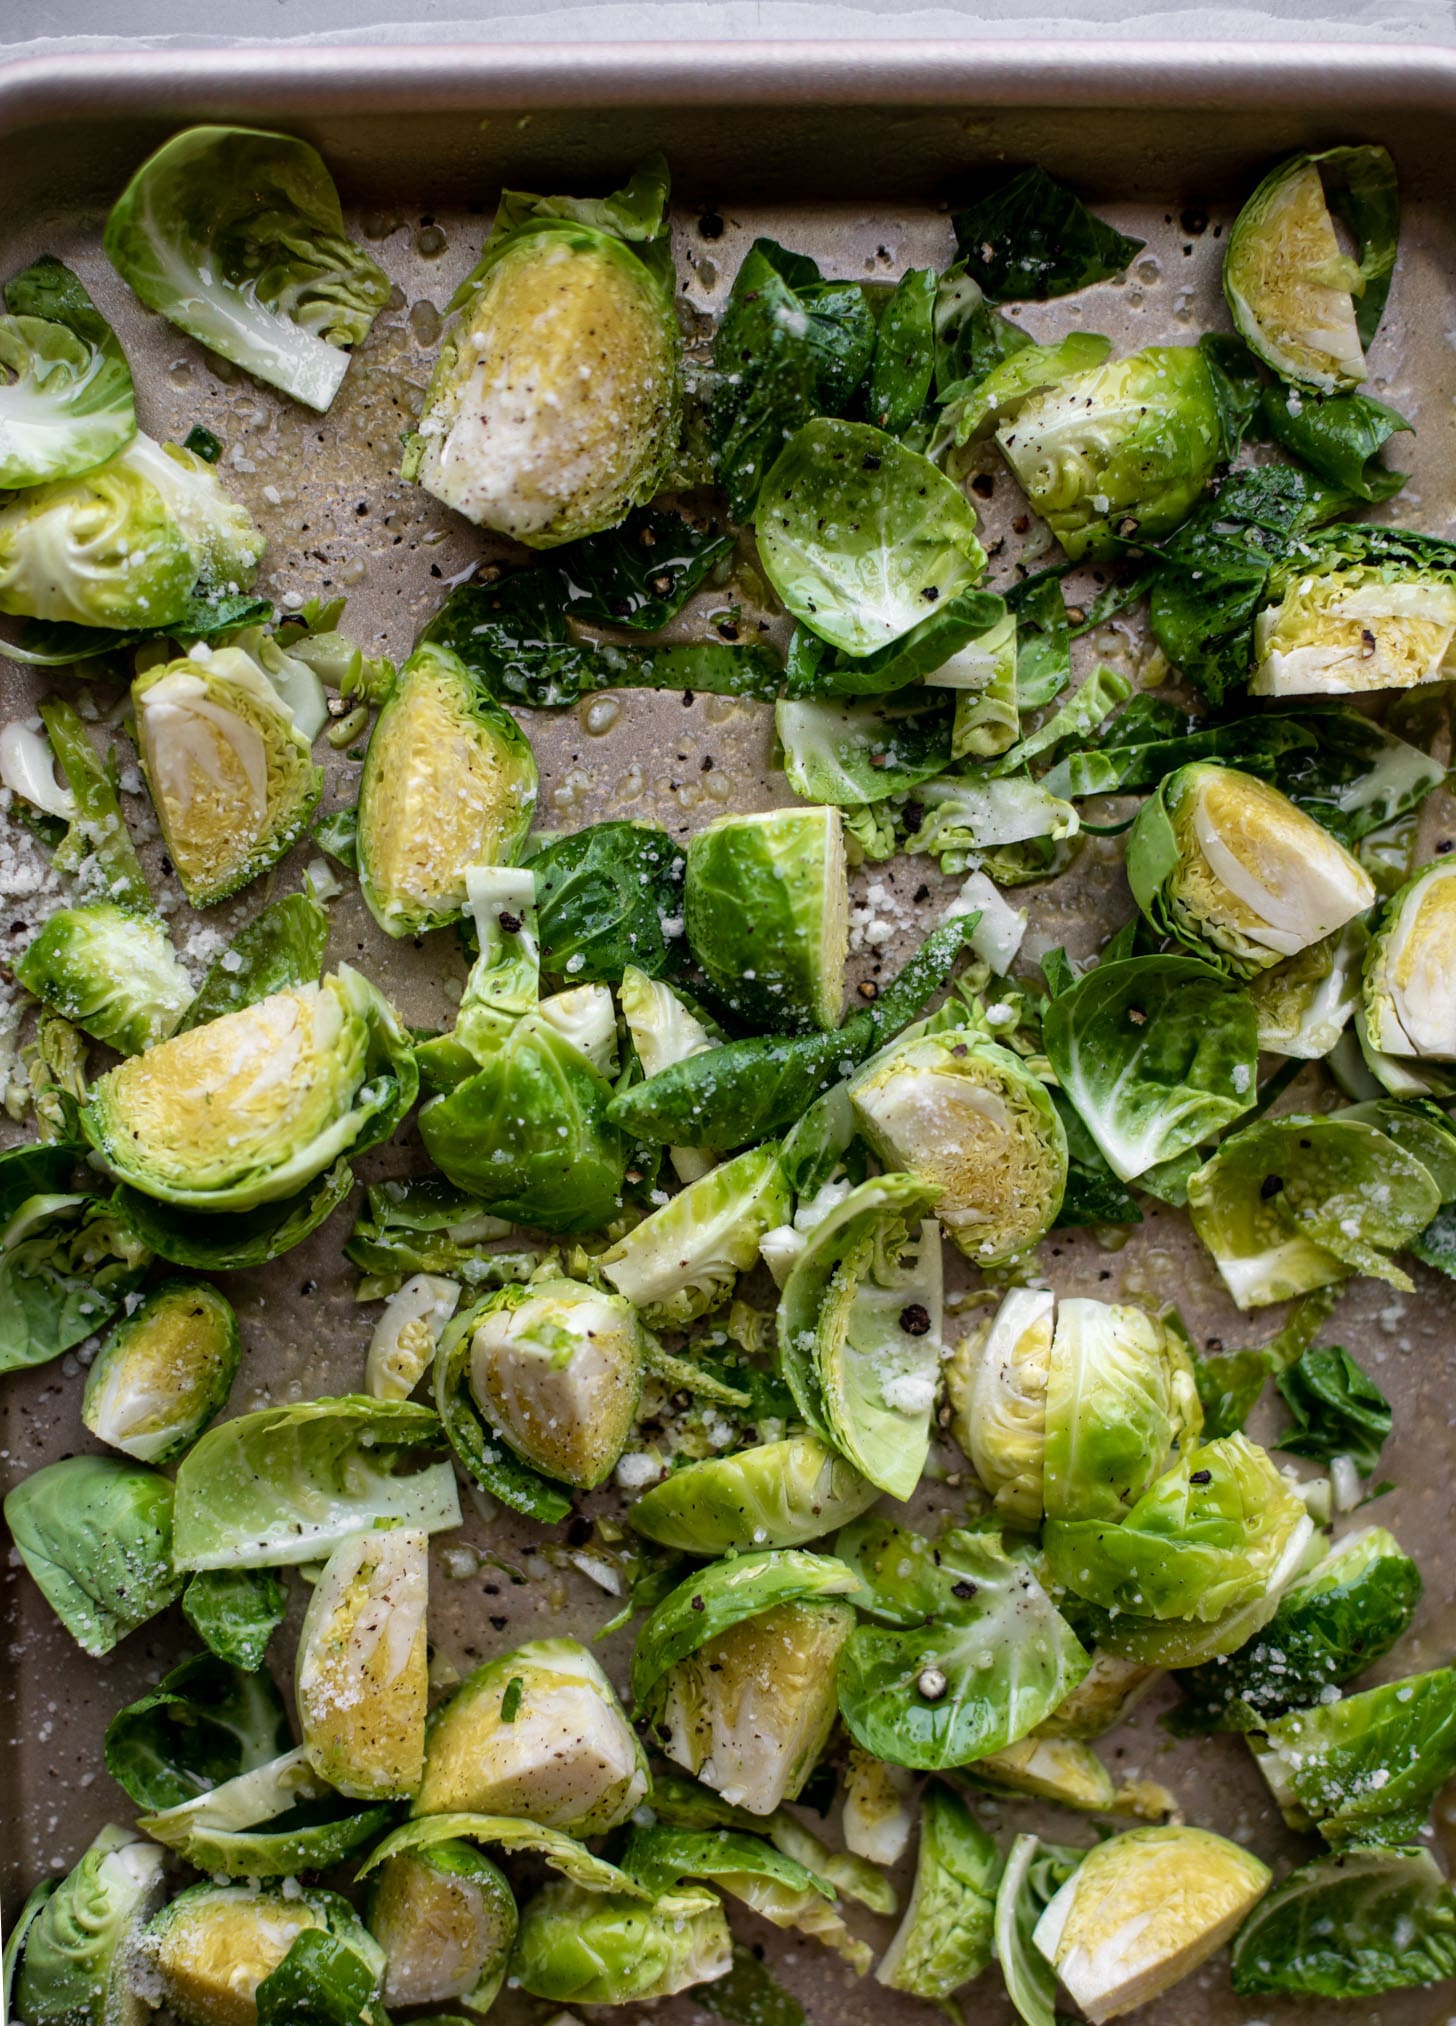 brussels sprouts ready to roast